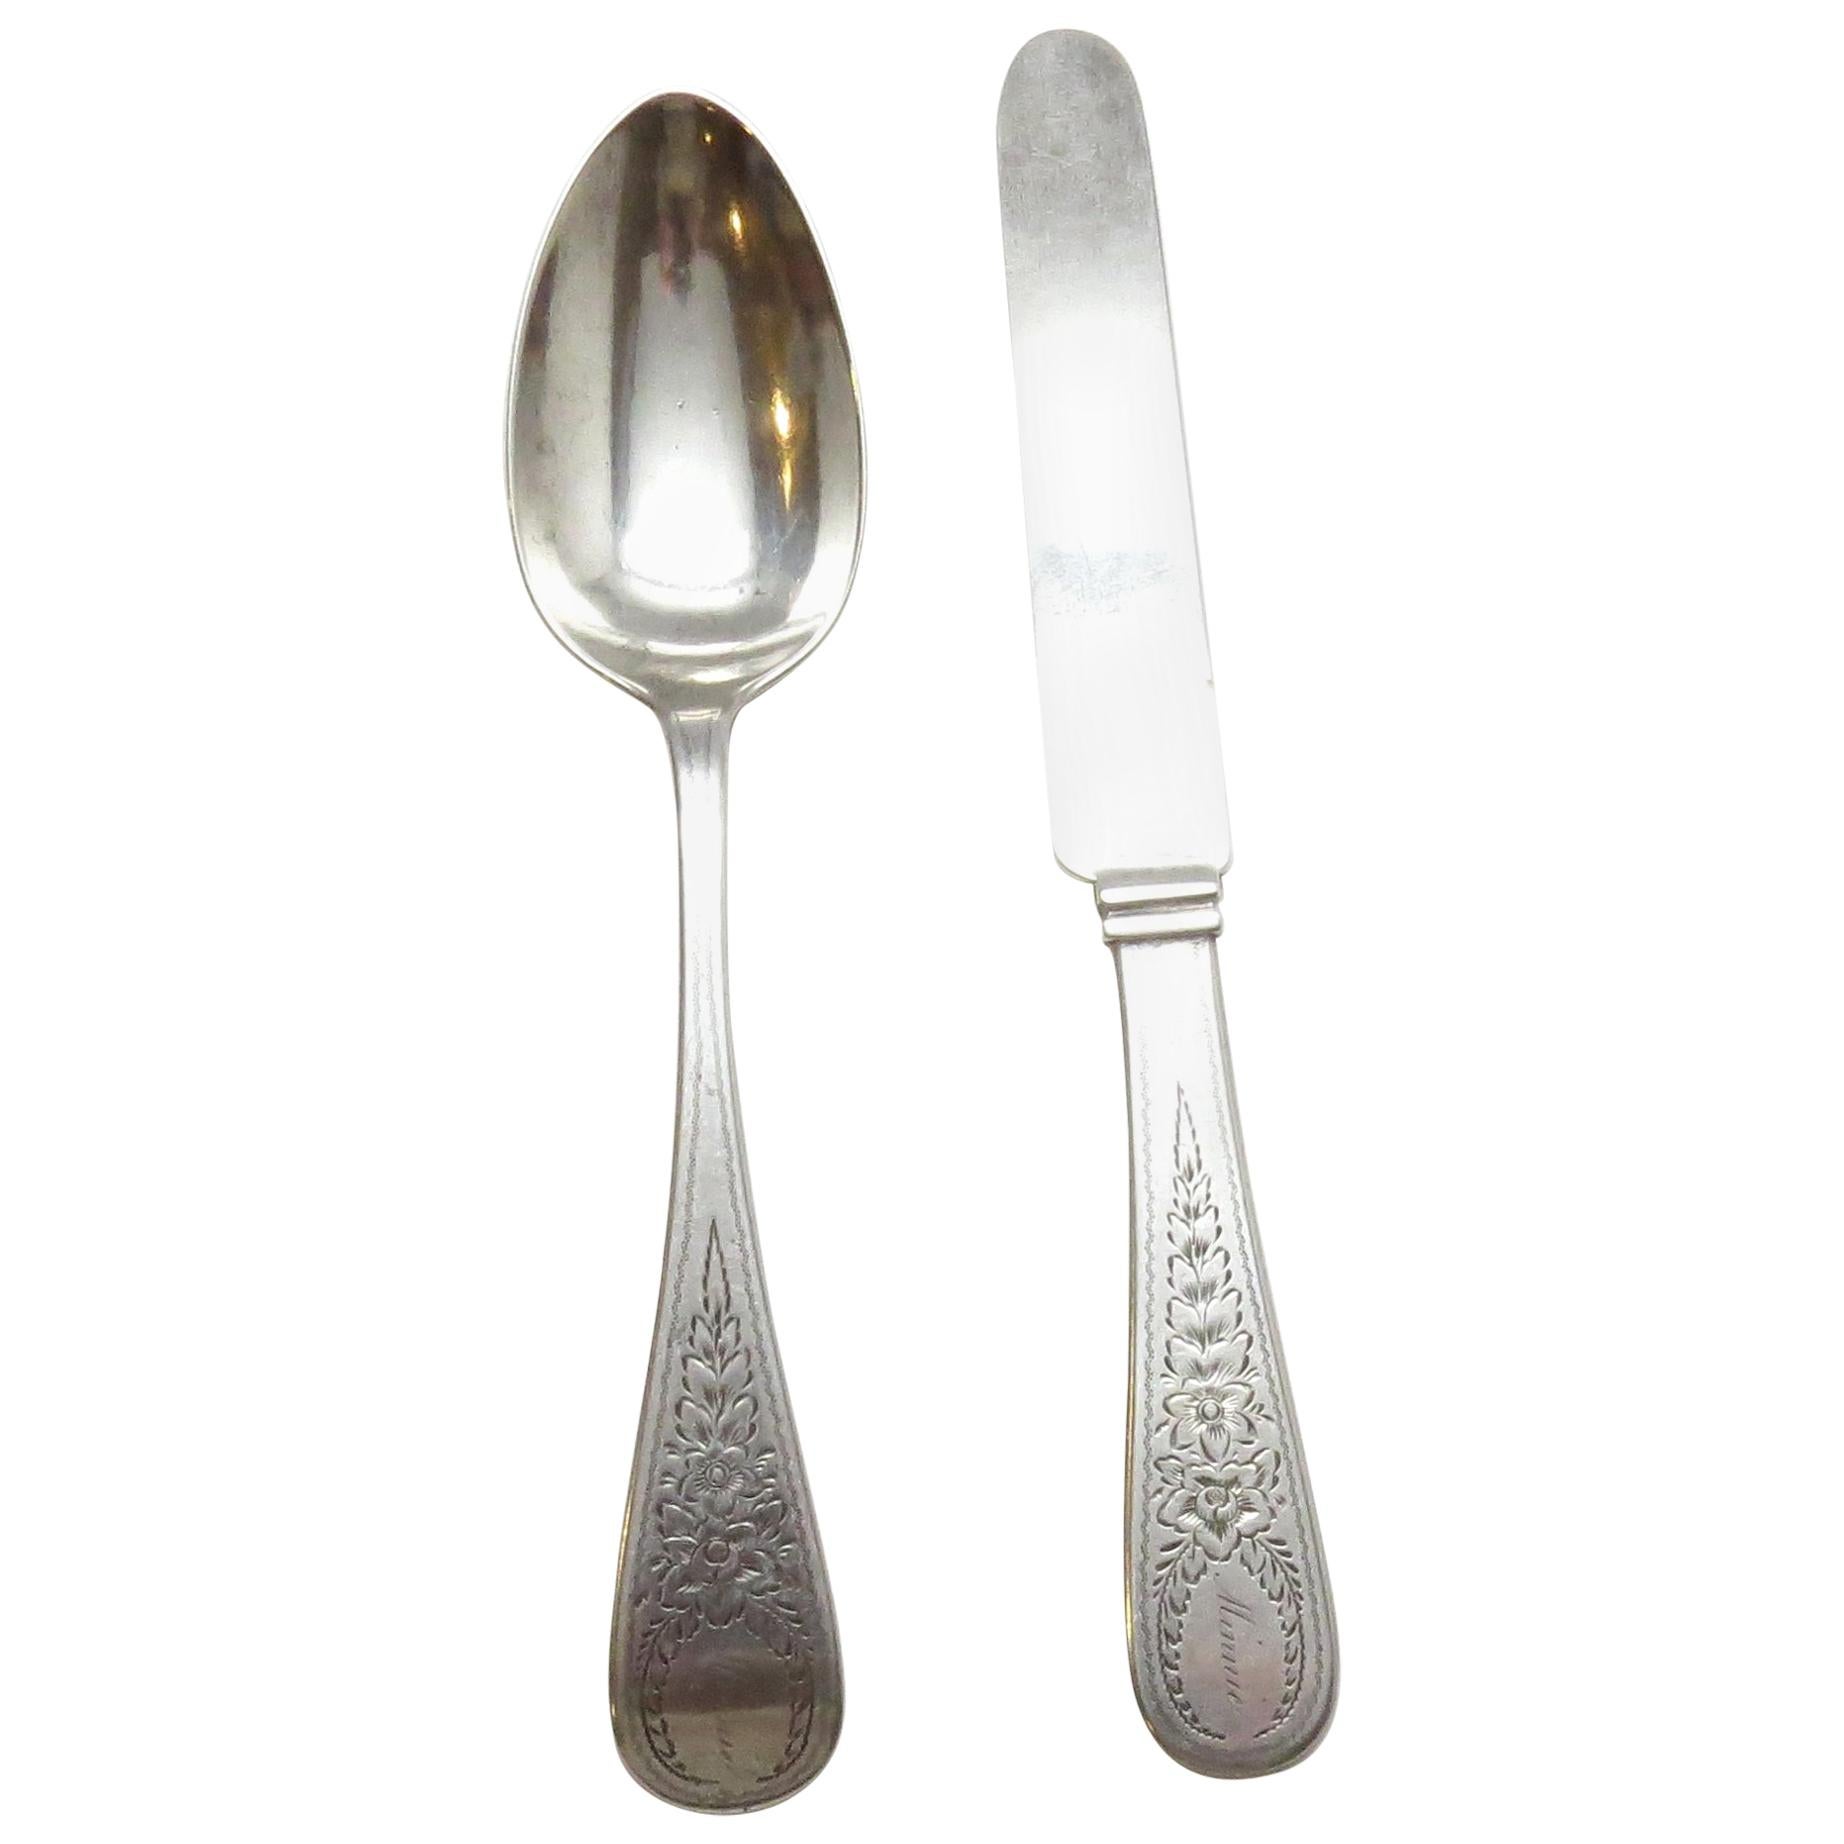 John Polhamus for Tiffany & Co. Sterling Silver Spoon and Knife, J*P